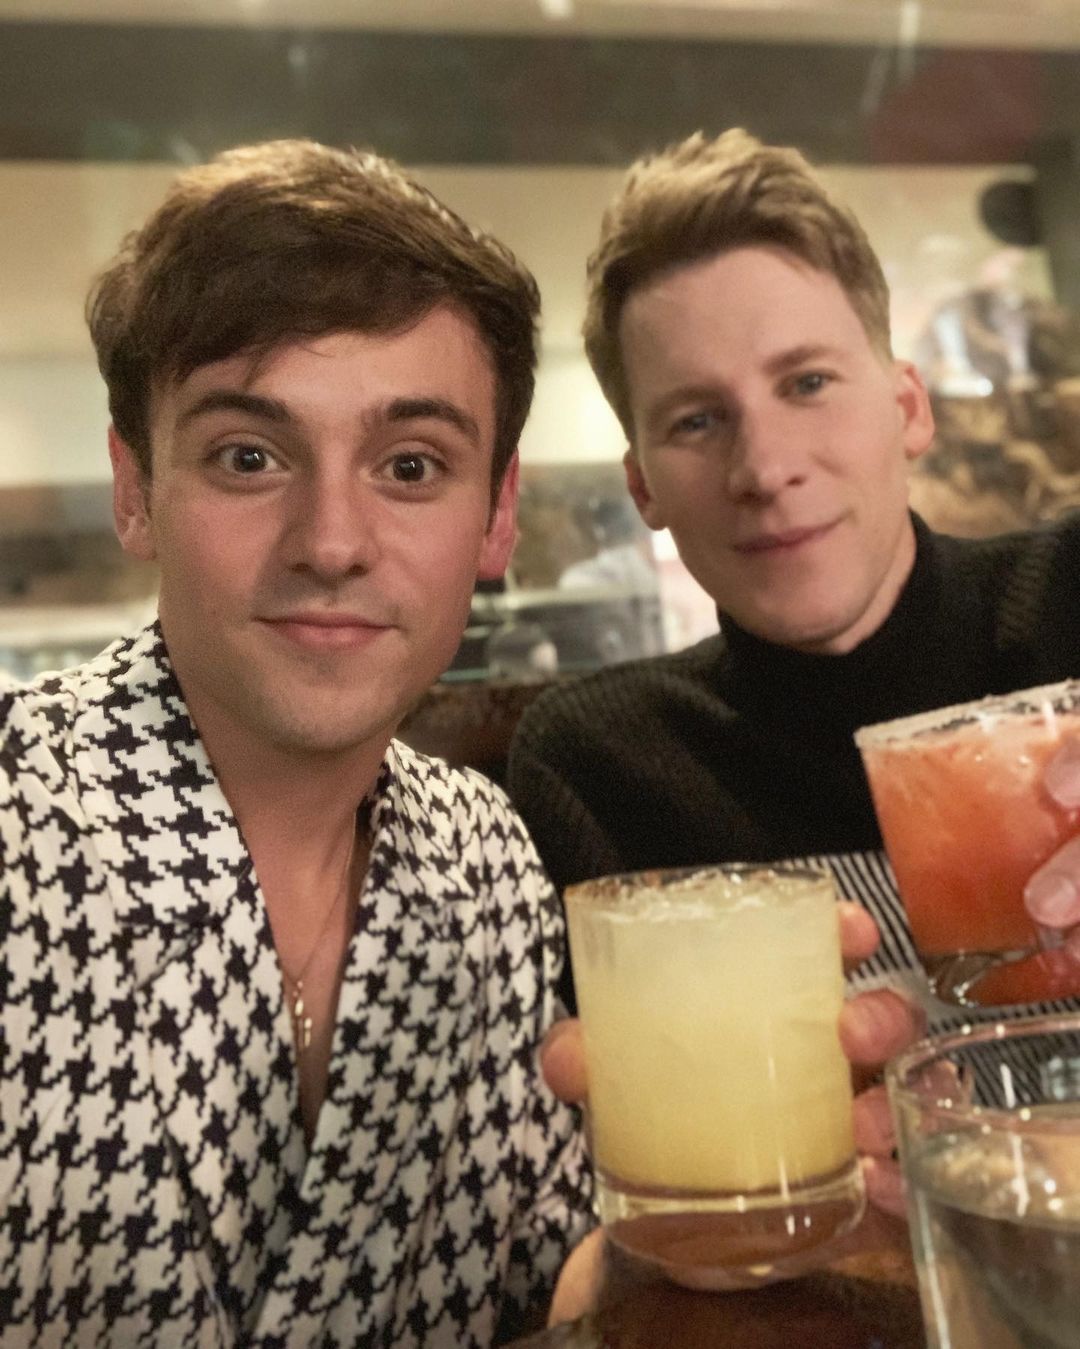 Tom Dalby and Dlance Black holding drinks in hand